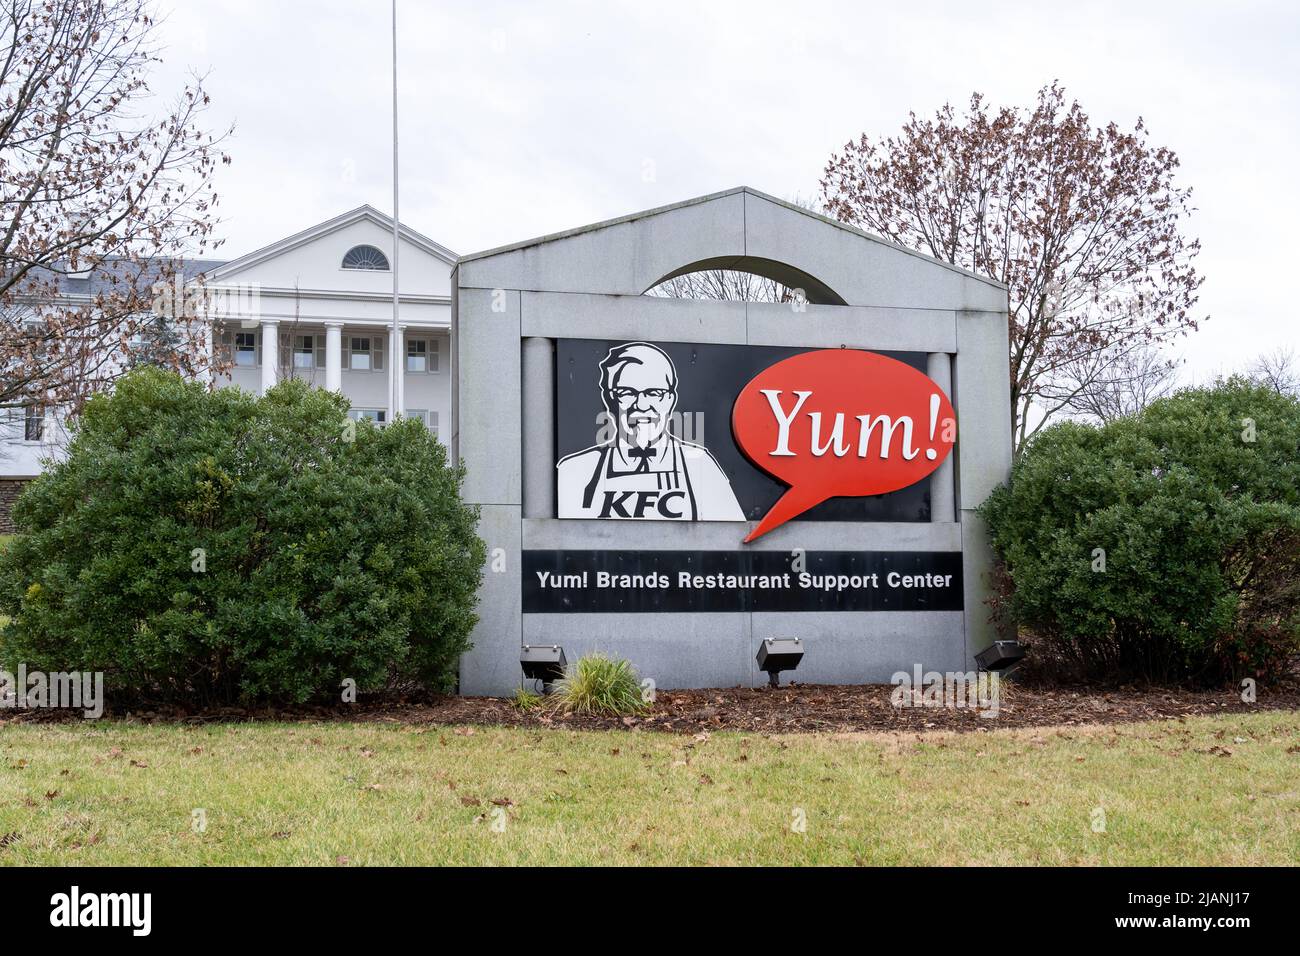 Louisville, KY, USA - December 28, 2021: Yum! Brands headquarters and support center in Louisville, KY., USA. Stock Photo